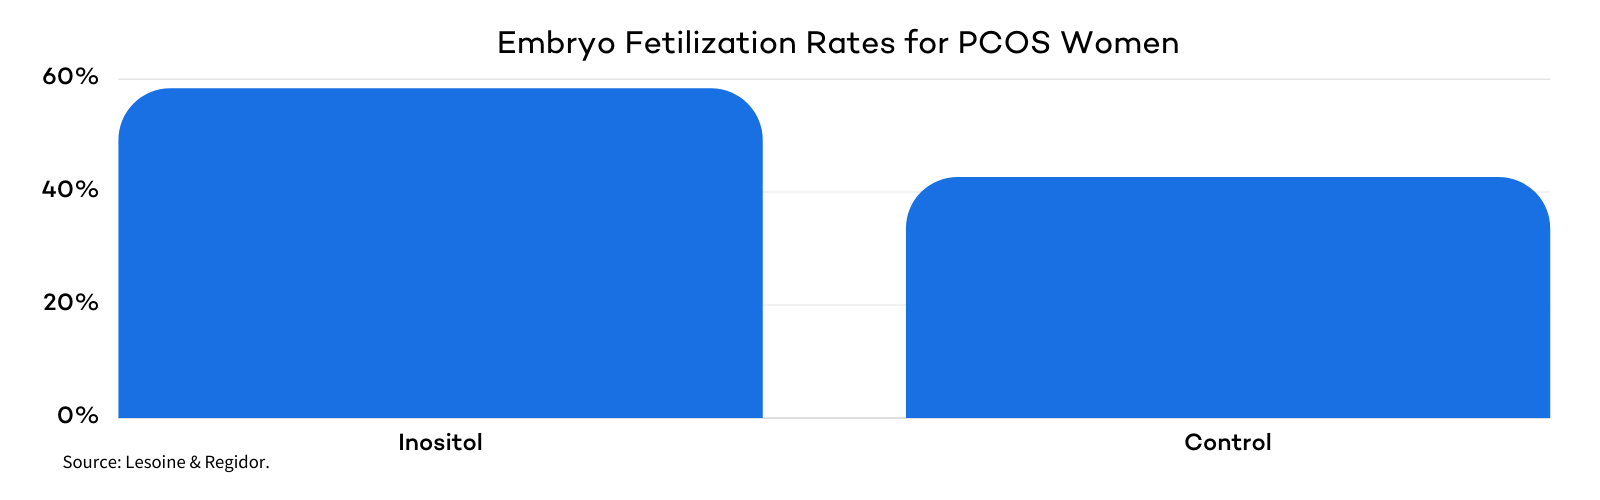 Inositol Supplements for PCOS - Embryo Fertilization